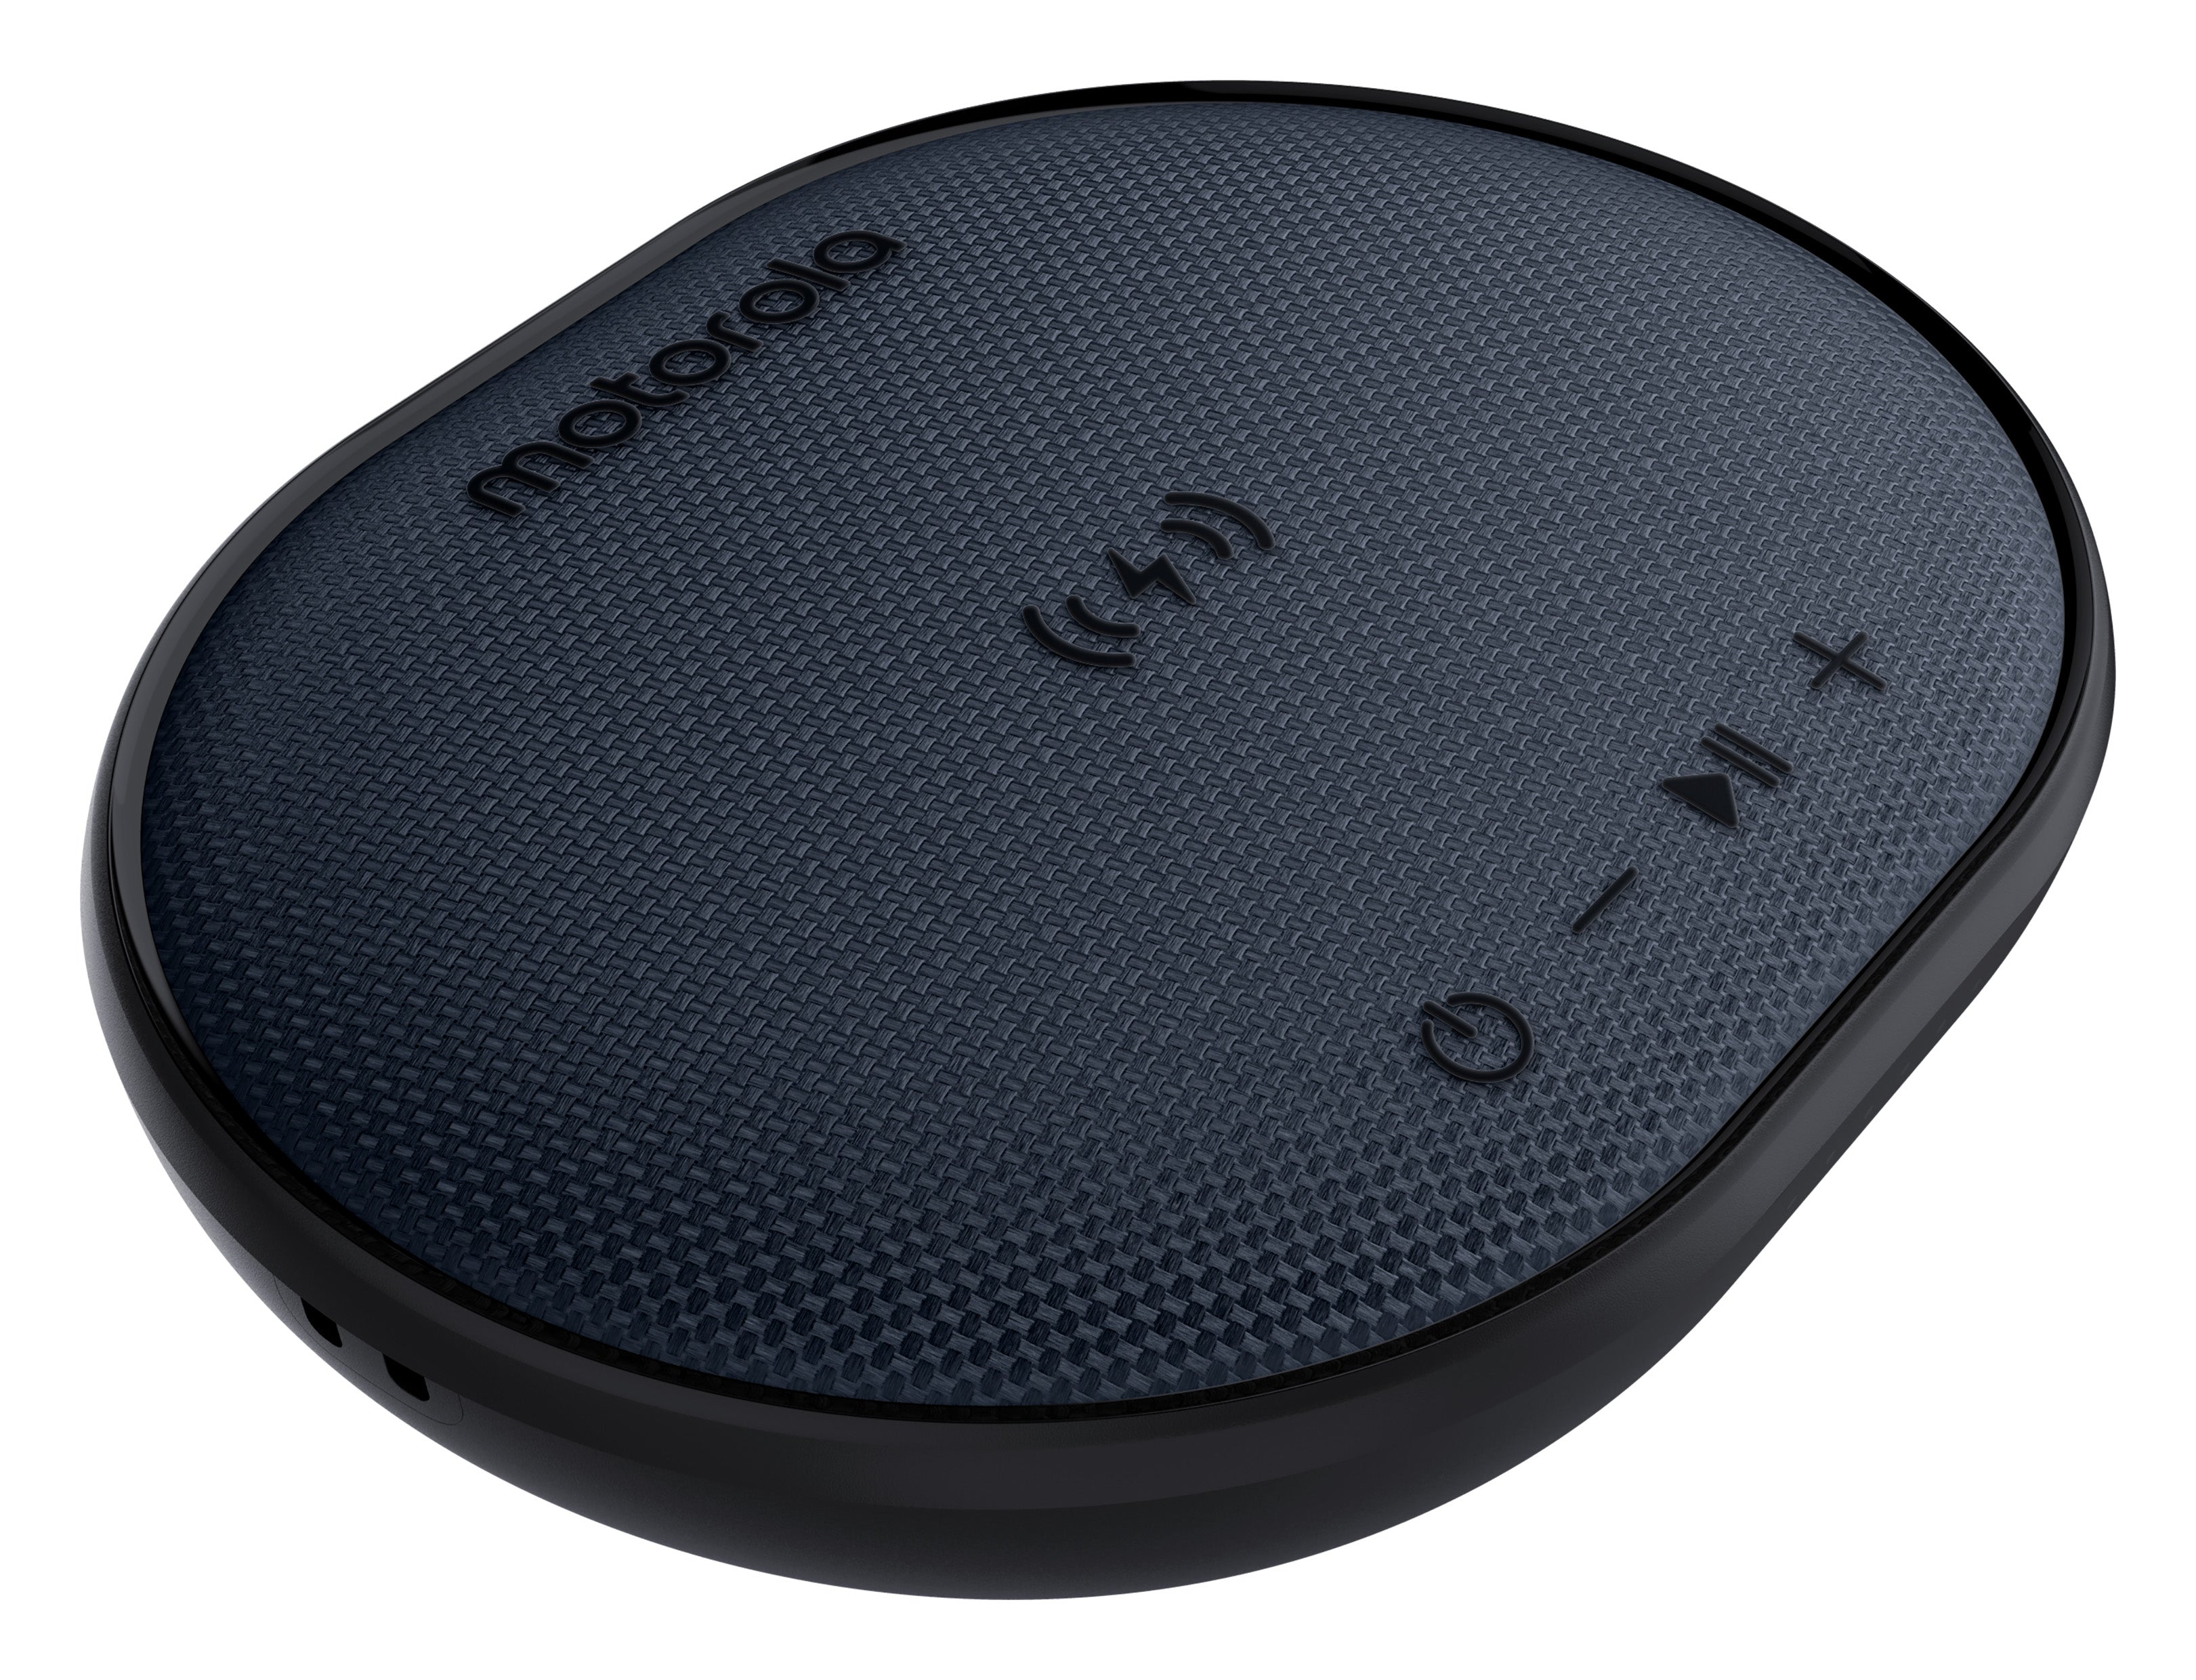 Motorola ROKR 500 Bluetooth Speaker with Integrated Wireless Charging Pad, Portable Speaker with Microphone for Handsfree Calls IPX6 Water Resistant